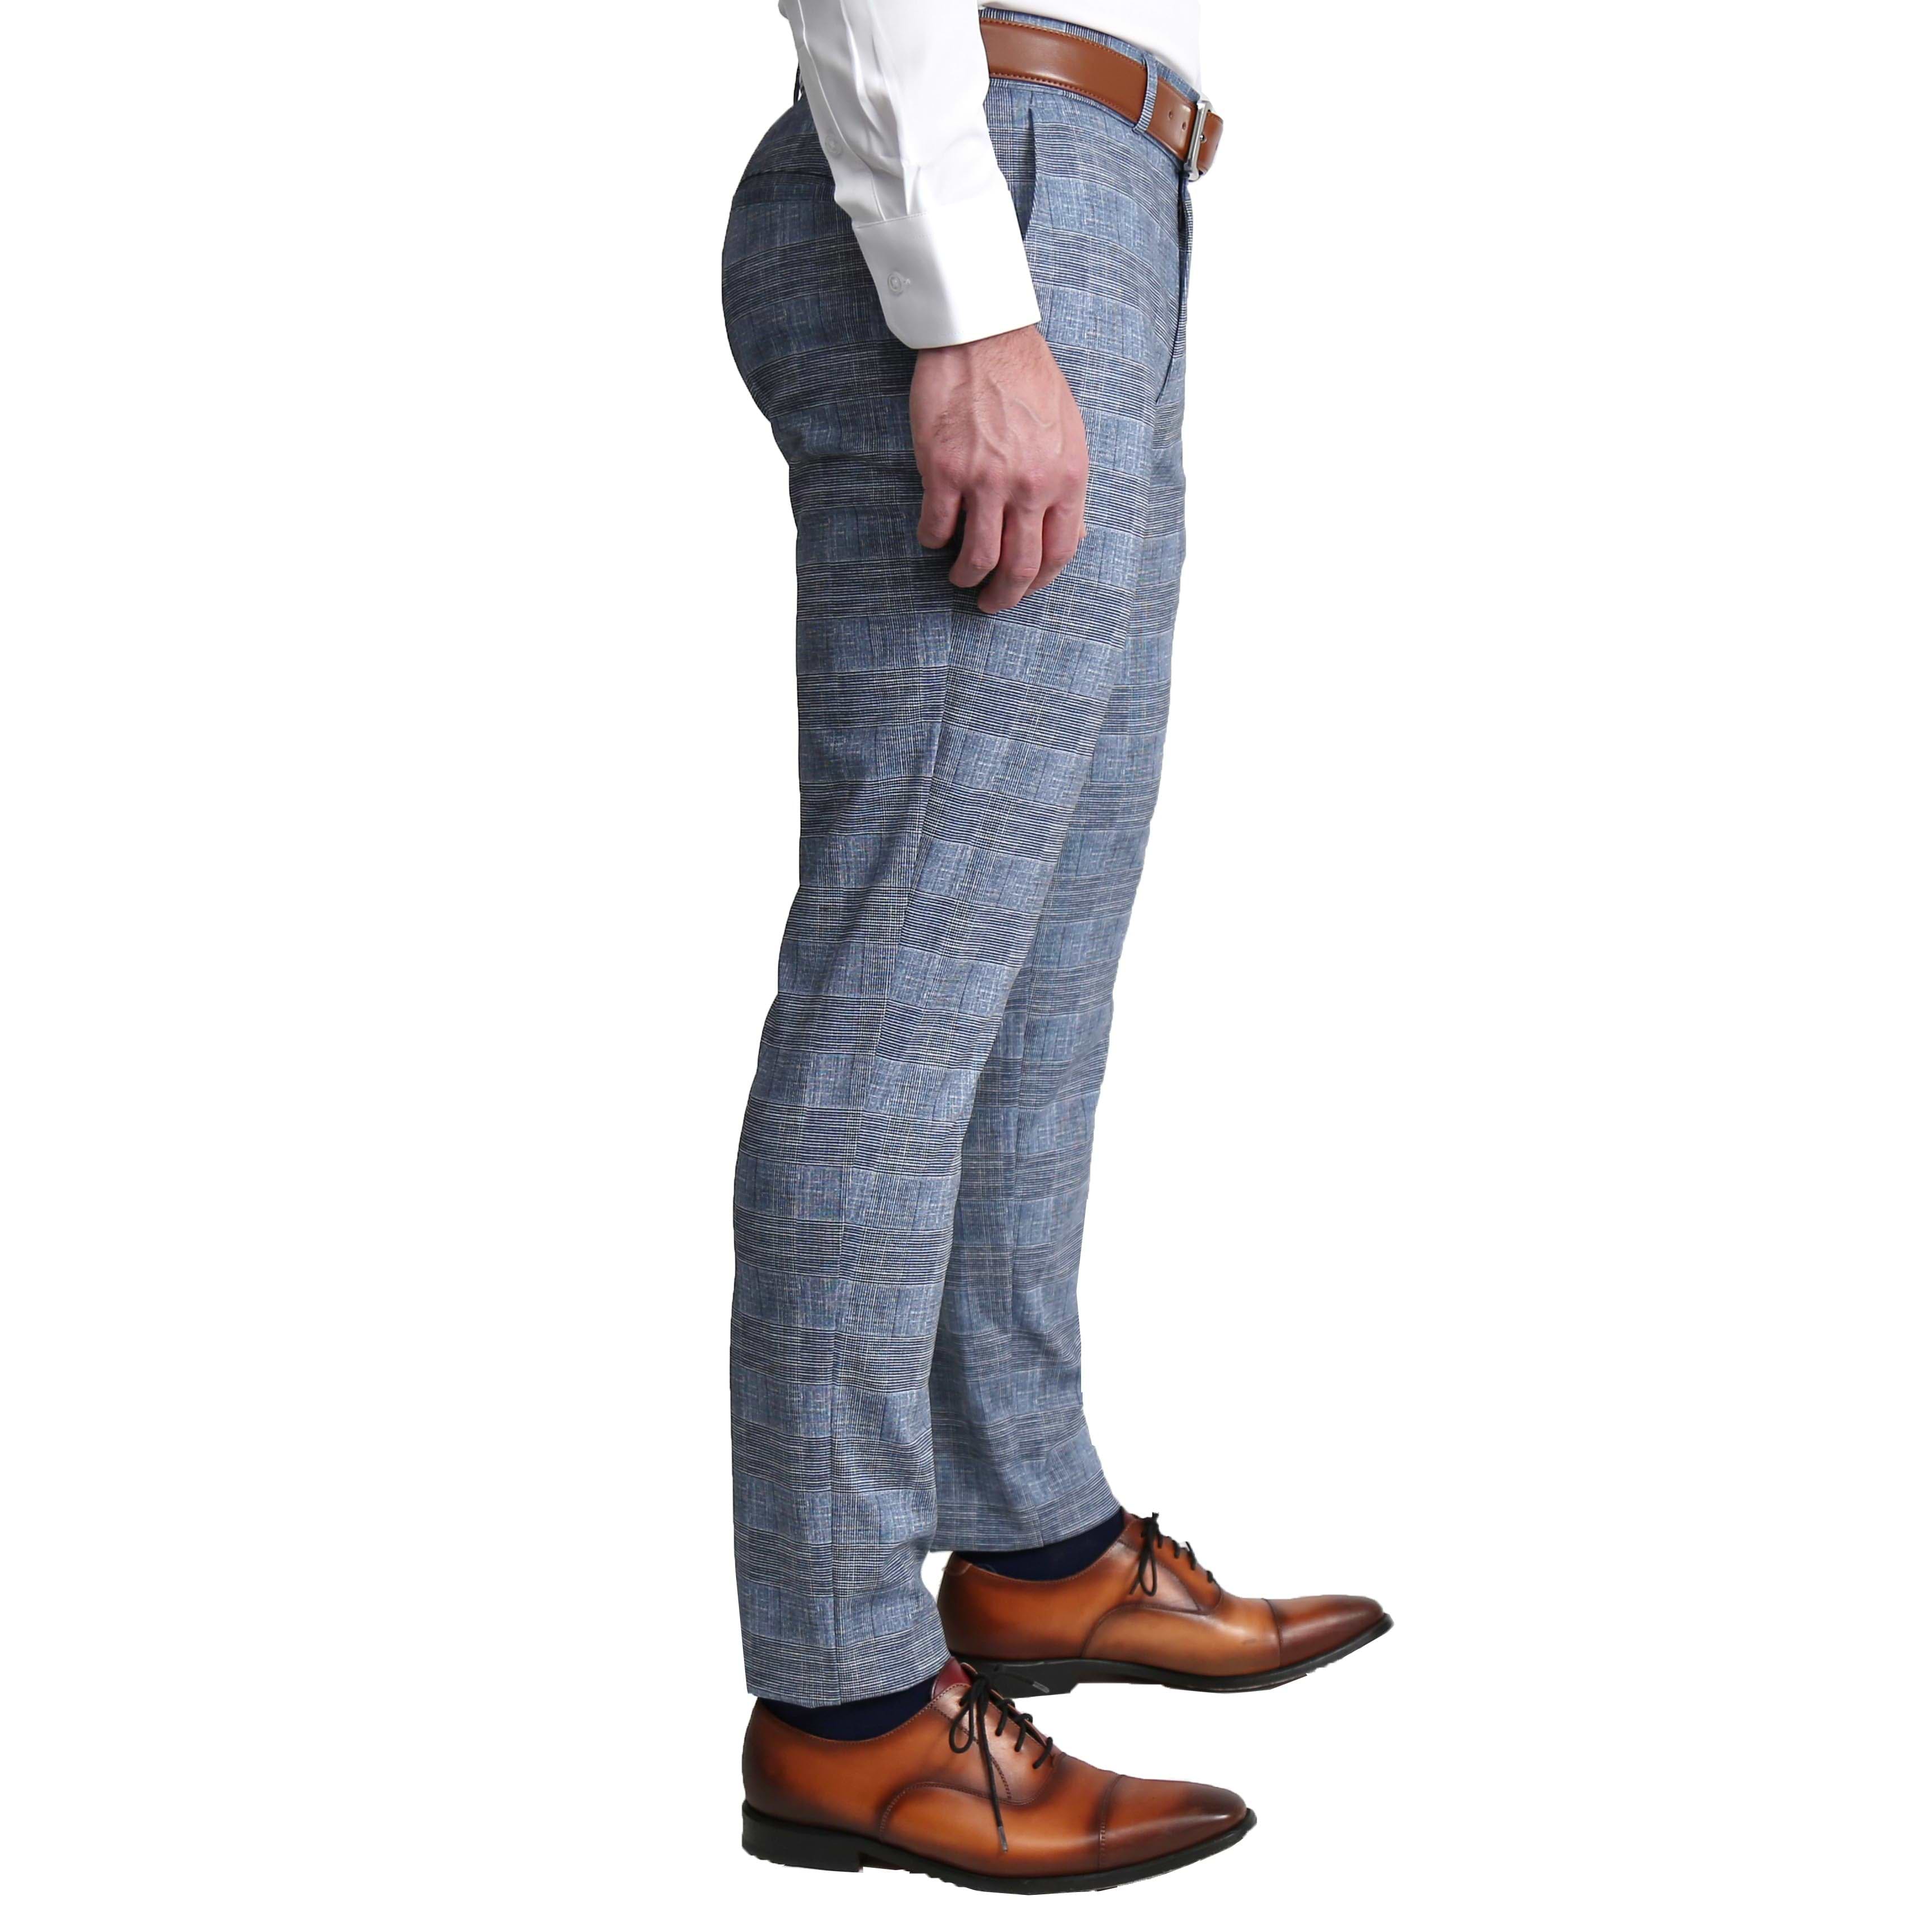 Athletic Fit Stretch Suit Pants - Knit Light Blue, Navy and White Plaid